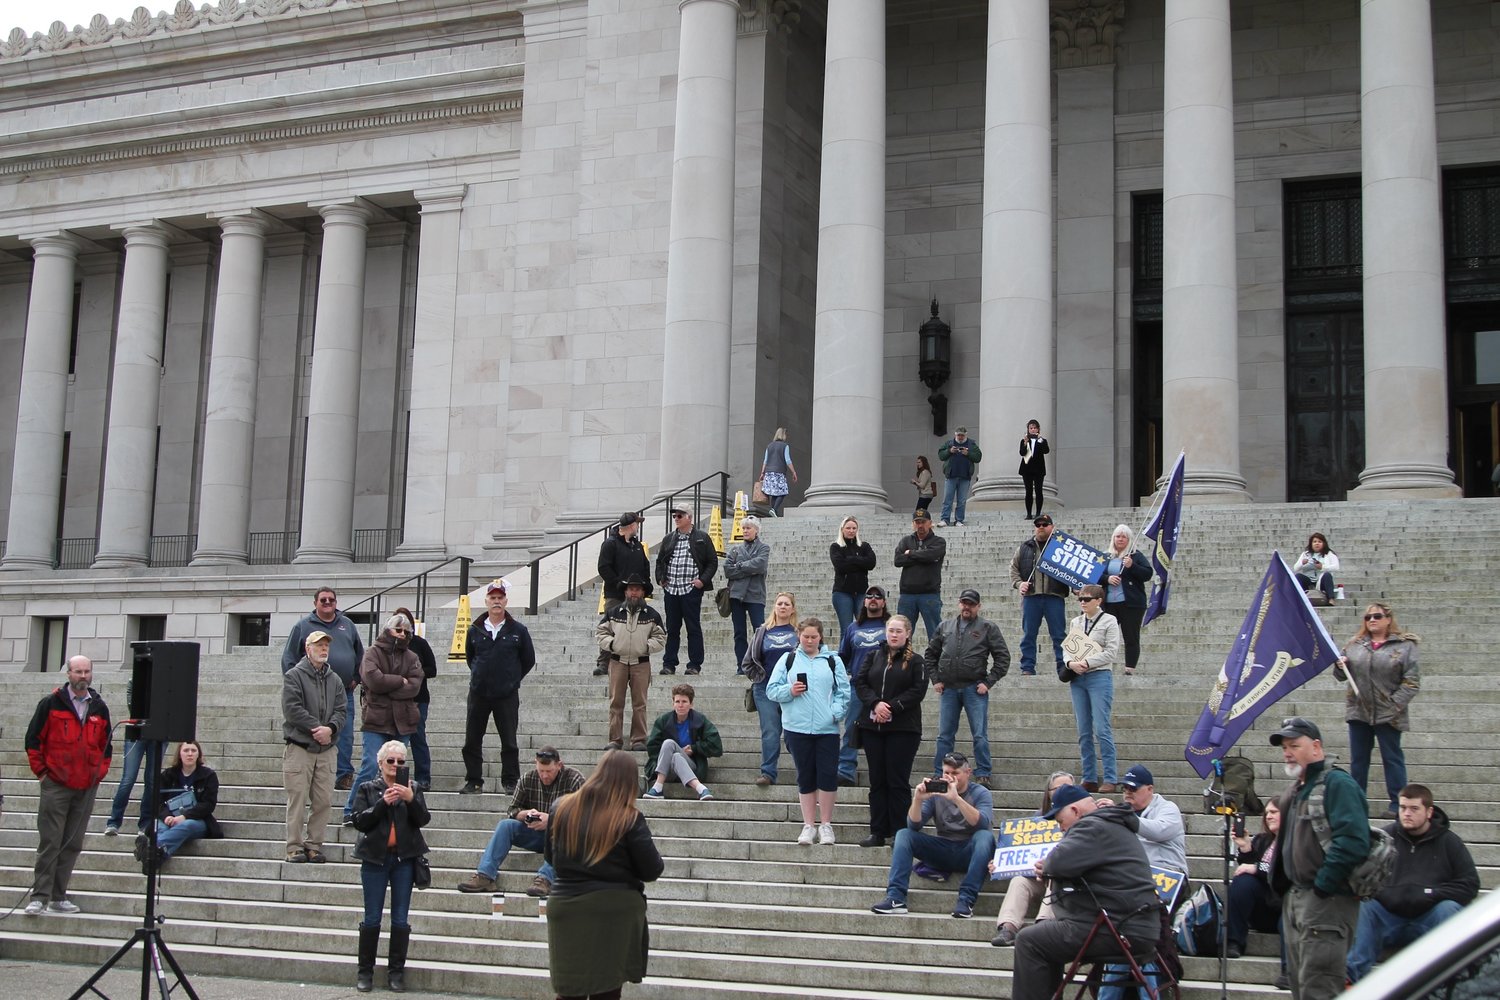 FILE PHOTO — Prior to members of the legislature arriving, attendees of the State of Liberty Rally last March gather on the steps of the legislative building. -- Photo by Emma Epperly, WNPA Olympia News Bureau